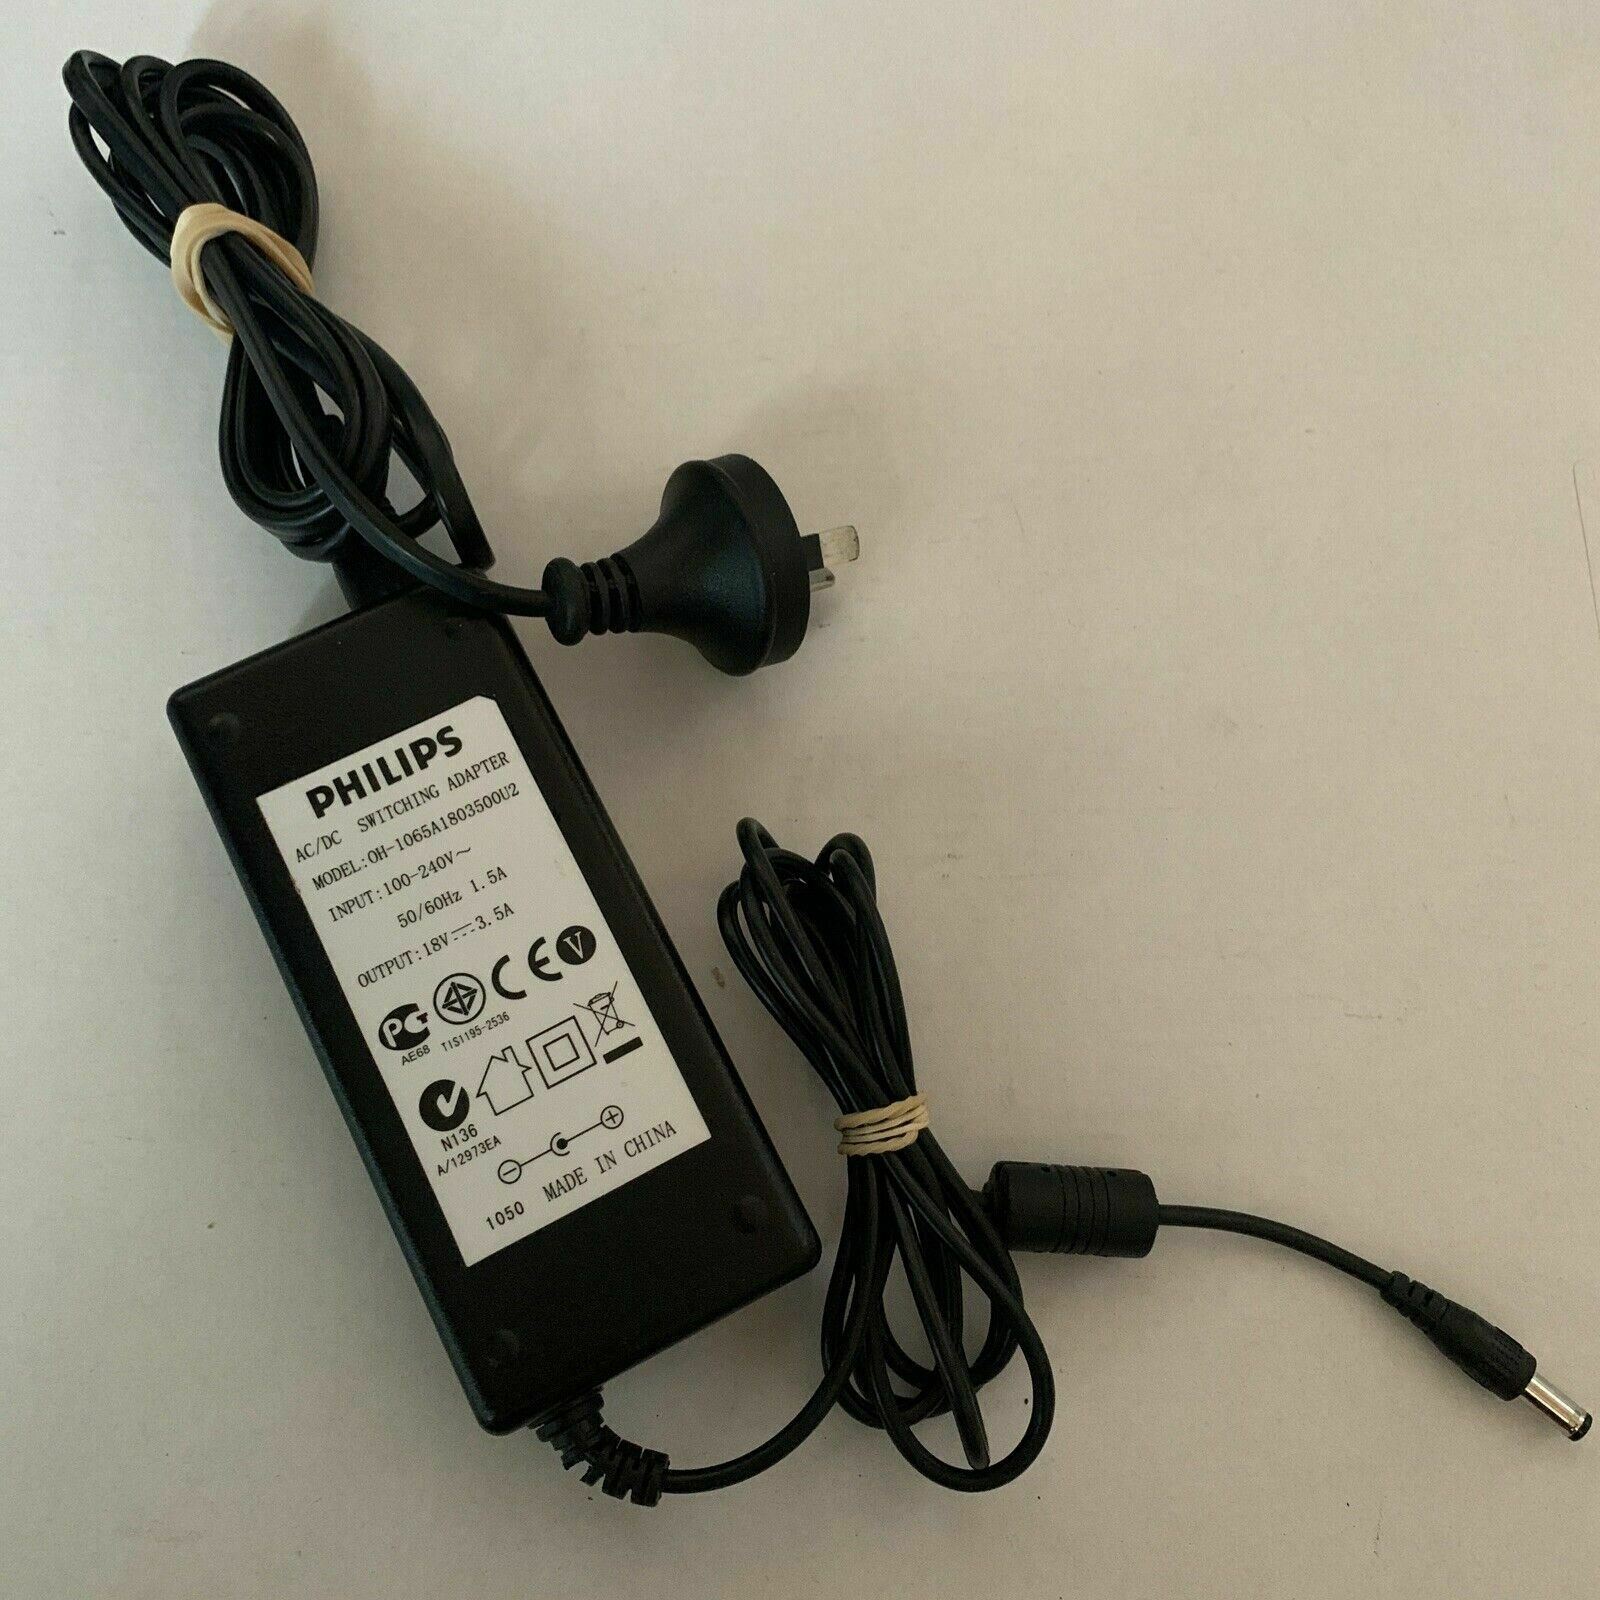 Genuine Philips Switching Adapter 0H-1065A1803500U2 18v 3.5a Power Supply Type: Adapter MPN: 0H-1065A1803500U2 Compatib